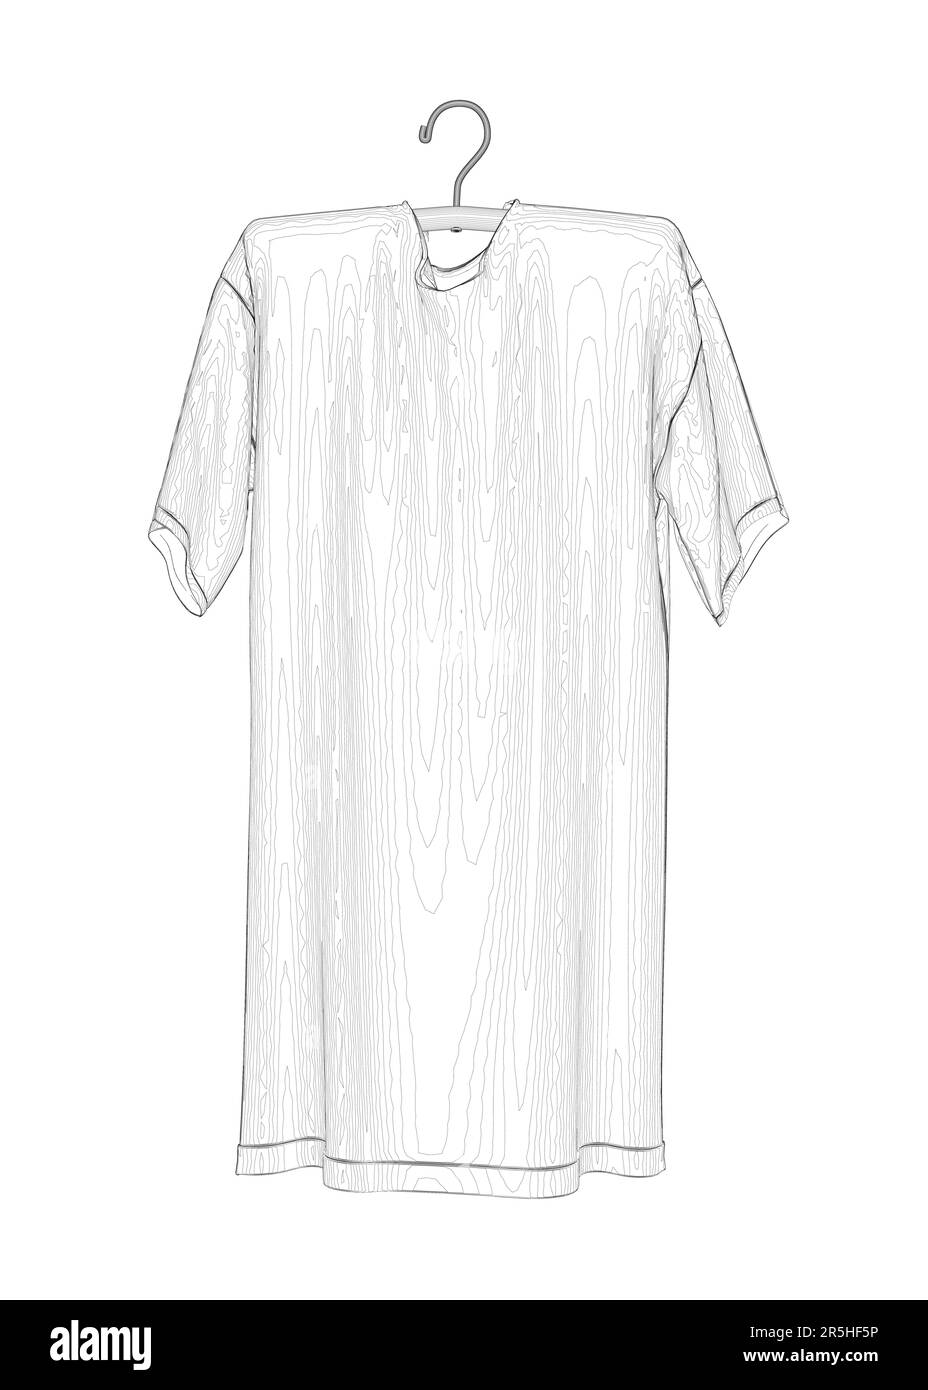 Outline of a T-shirt hanging on a hanger from black lines isolated on a ...